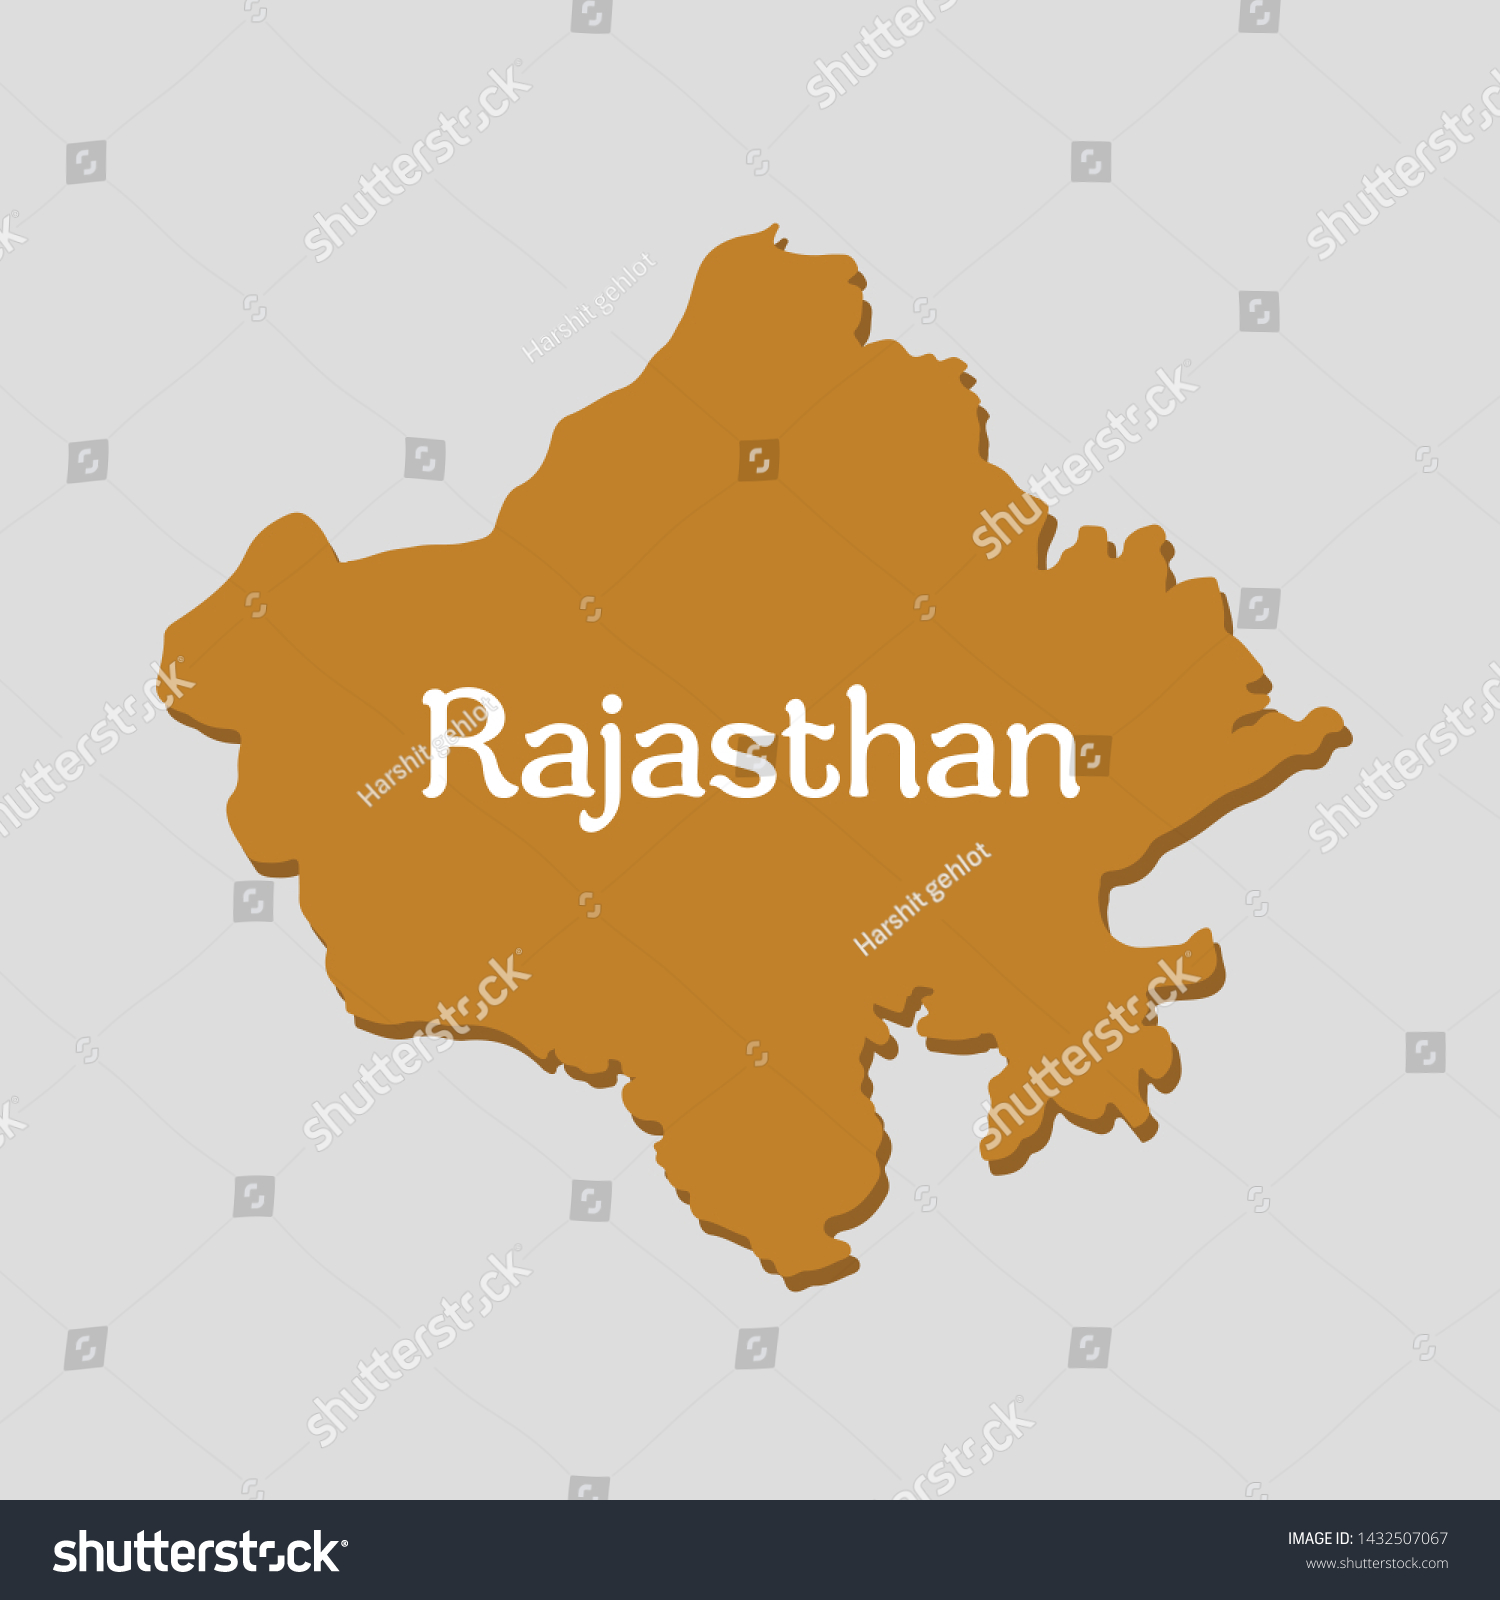 Rajasthan Map Flat Vactor Design State Stock Vector (Royalty Free ...